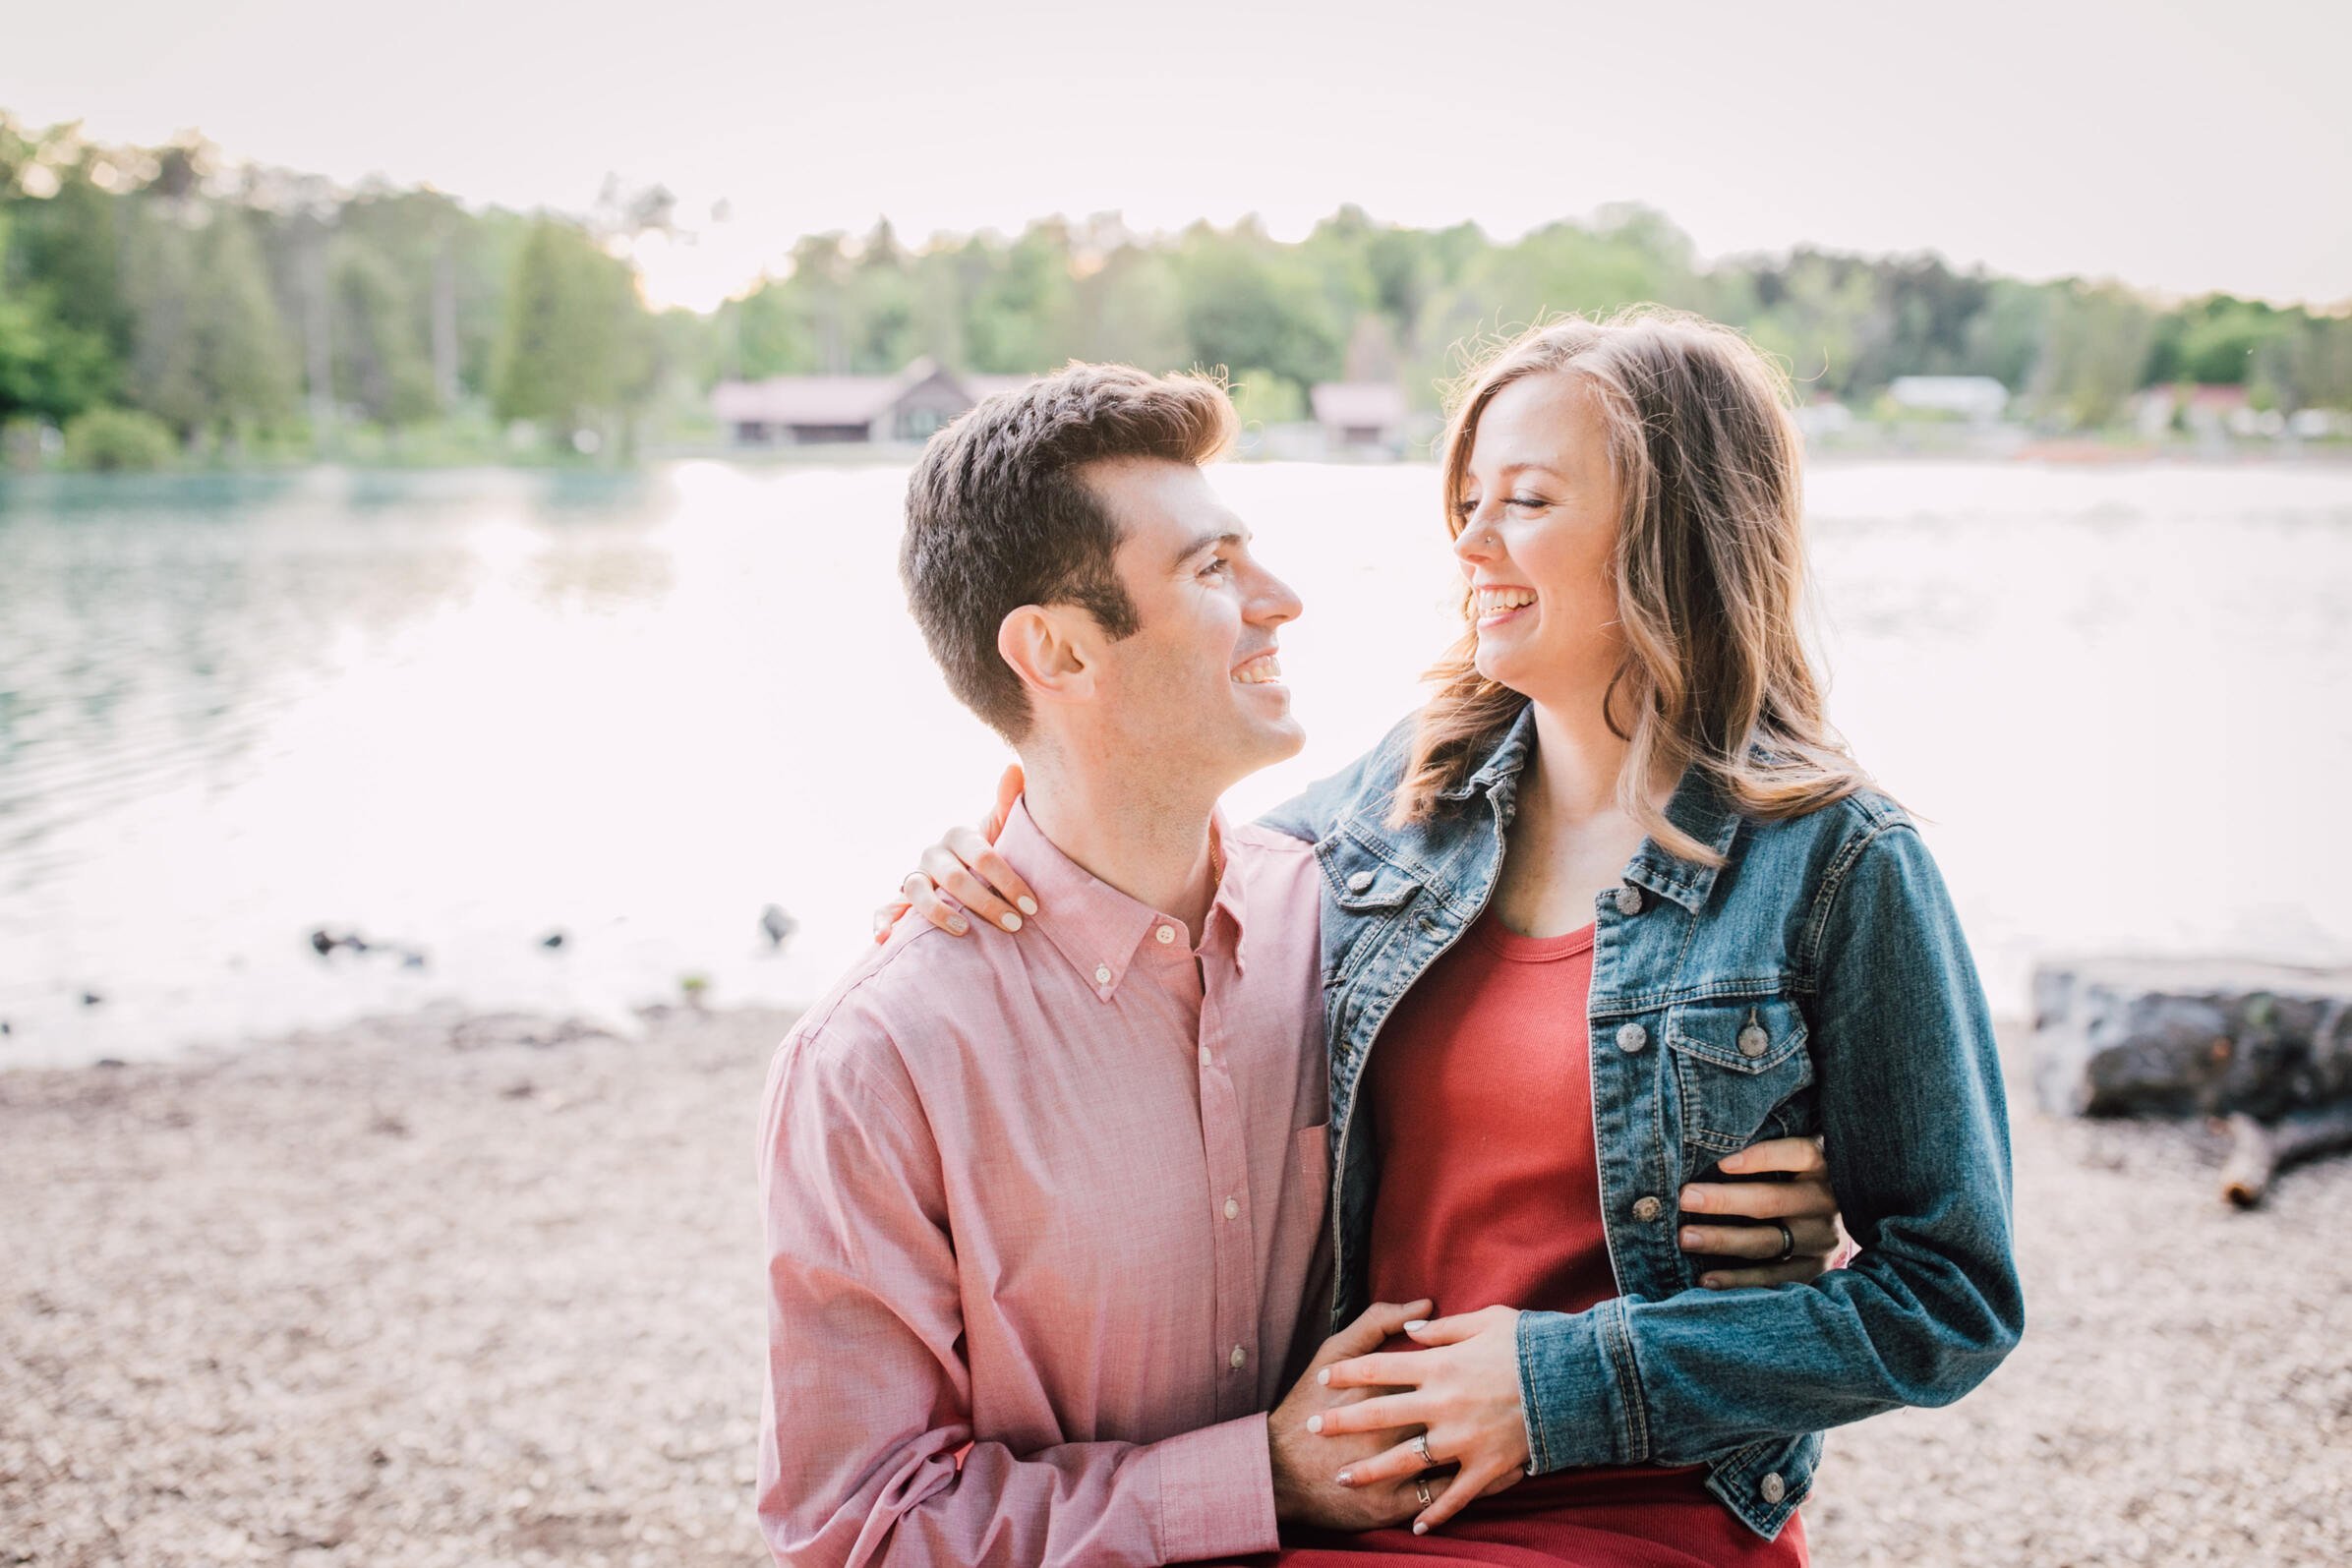  Parents to be laugh together during pregnancy announcement photos 